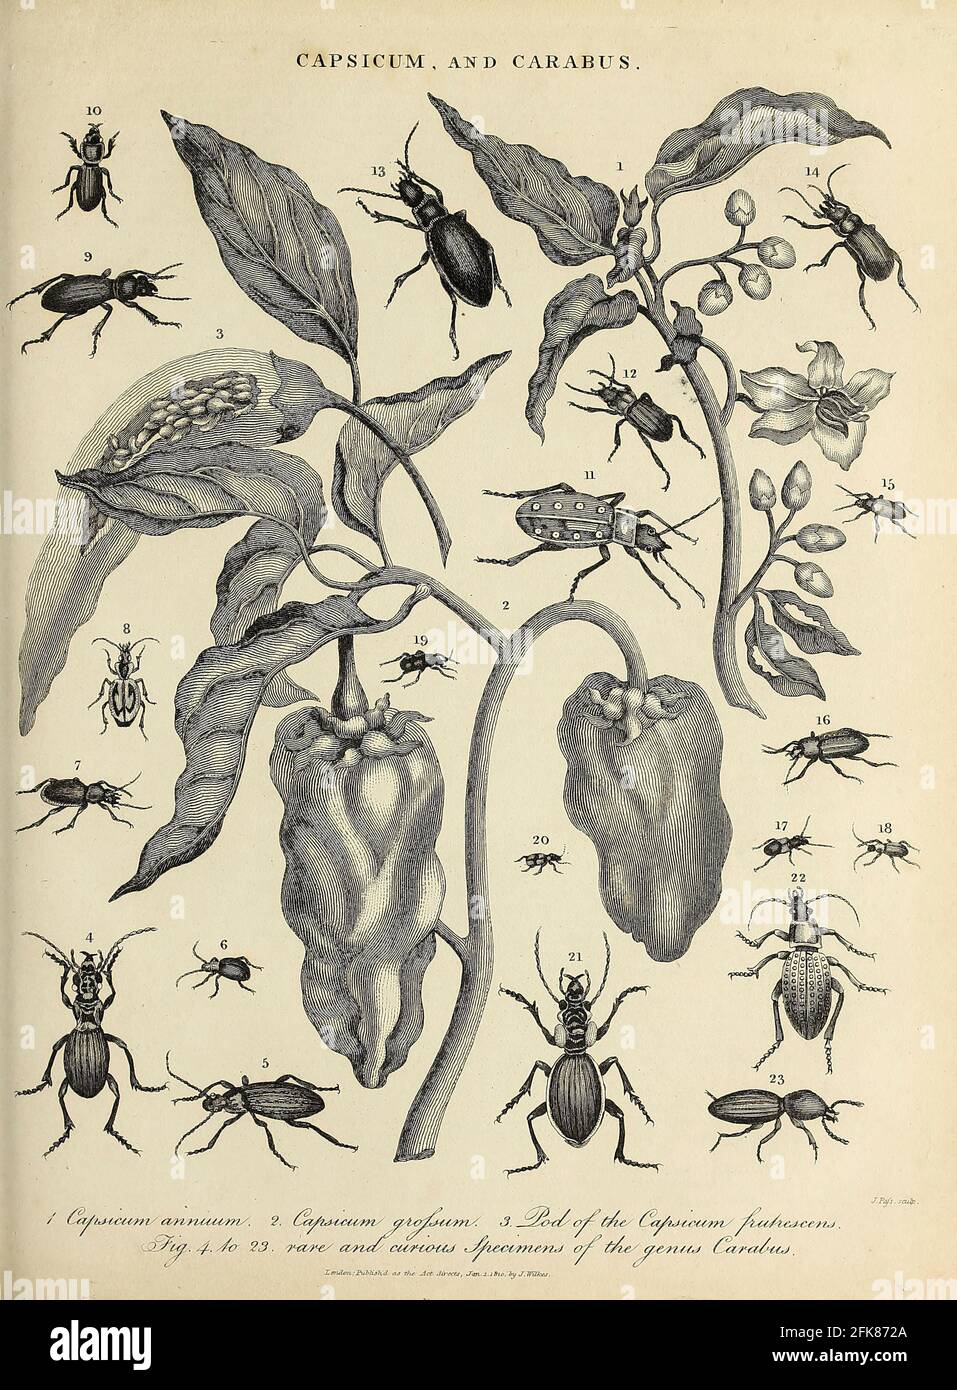 Capsicum (Peppers) and specimens of the Beetle genus Carabus Copperplate engraving From the Encyclopaedia Londinensis or, Universal dictionary of arts, sciences, and literature; Volume III;  Edited by Wilkes, John. Published in London in 1810 Stock Photo